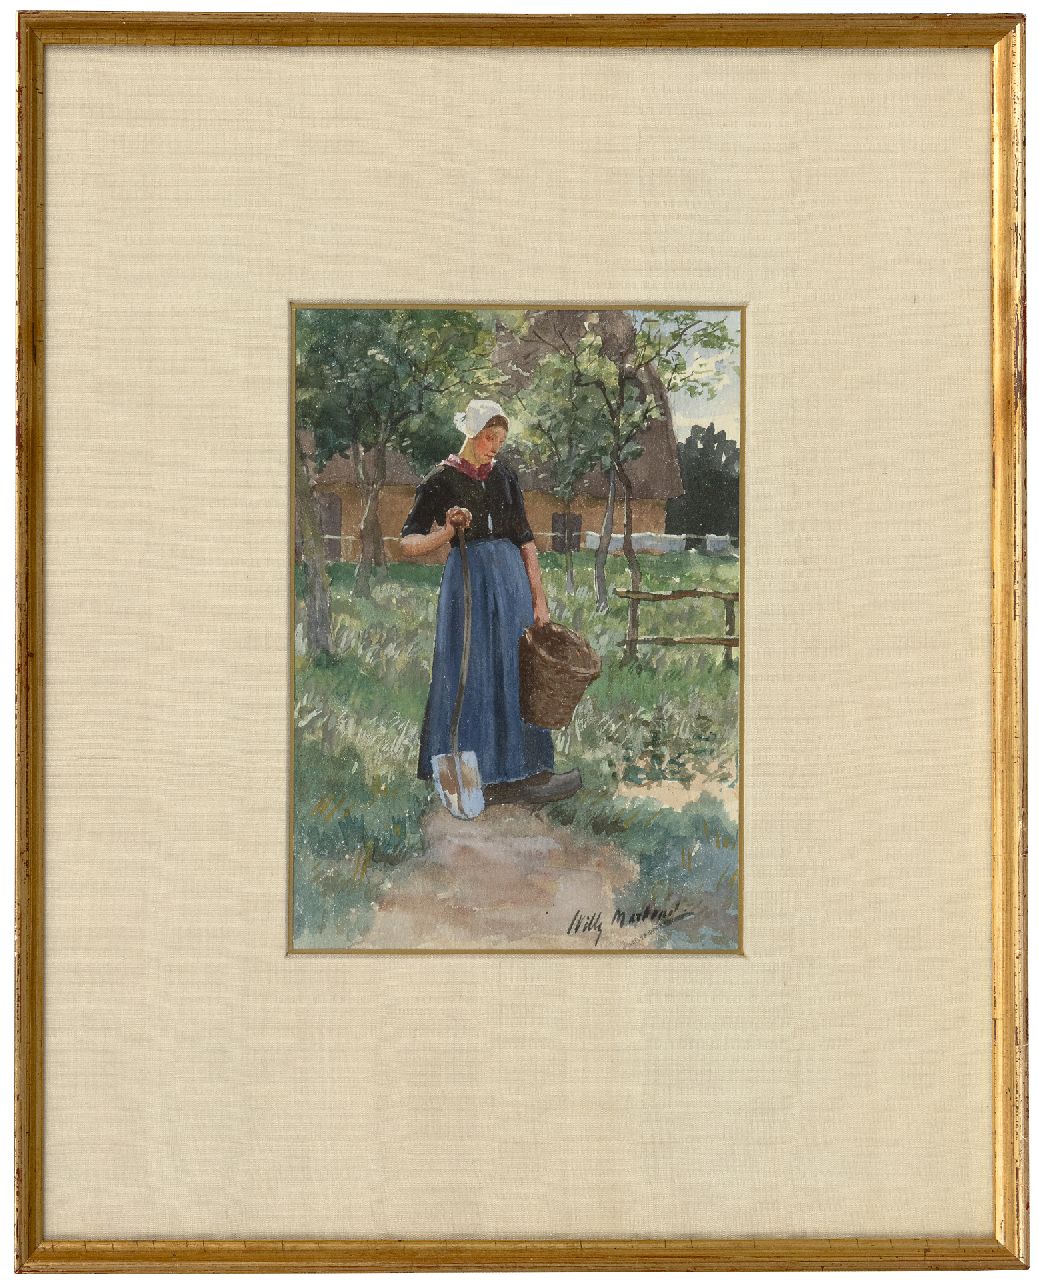 Martens W.  | Willem 'Willy' Martens | Watercolours and drawings offered for sale | Young peasant woman in a vegetable garden, watercolour on paper 18.5 x 13.5 cm, signed l.r.